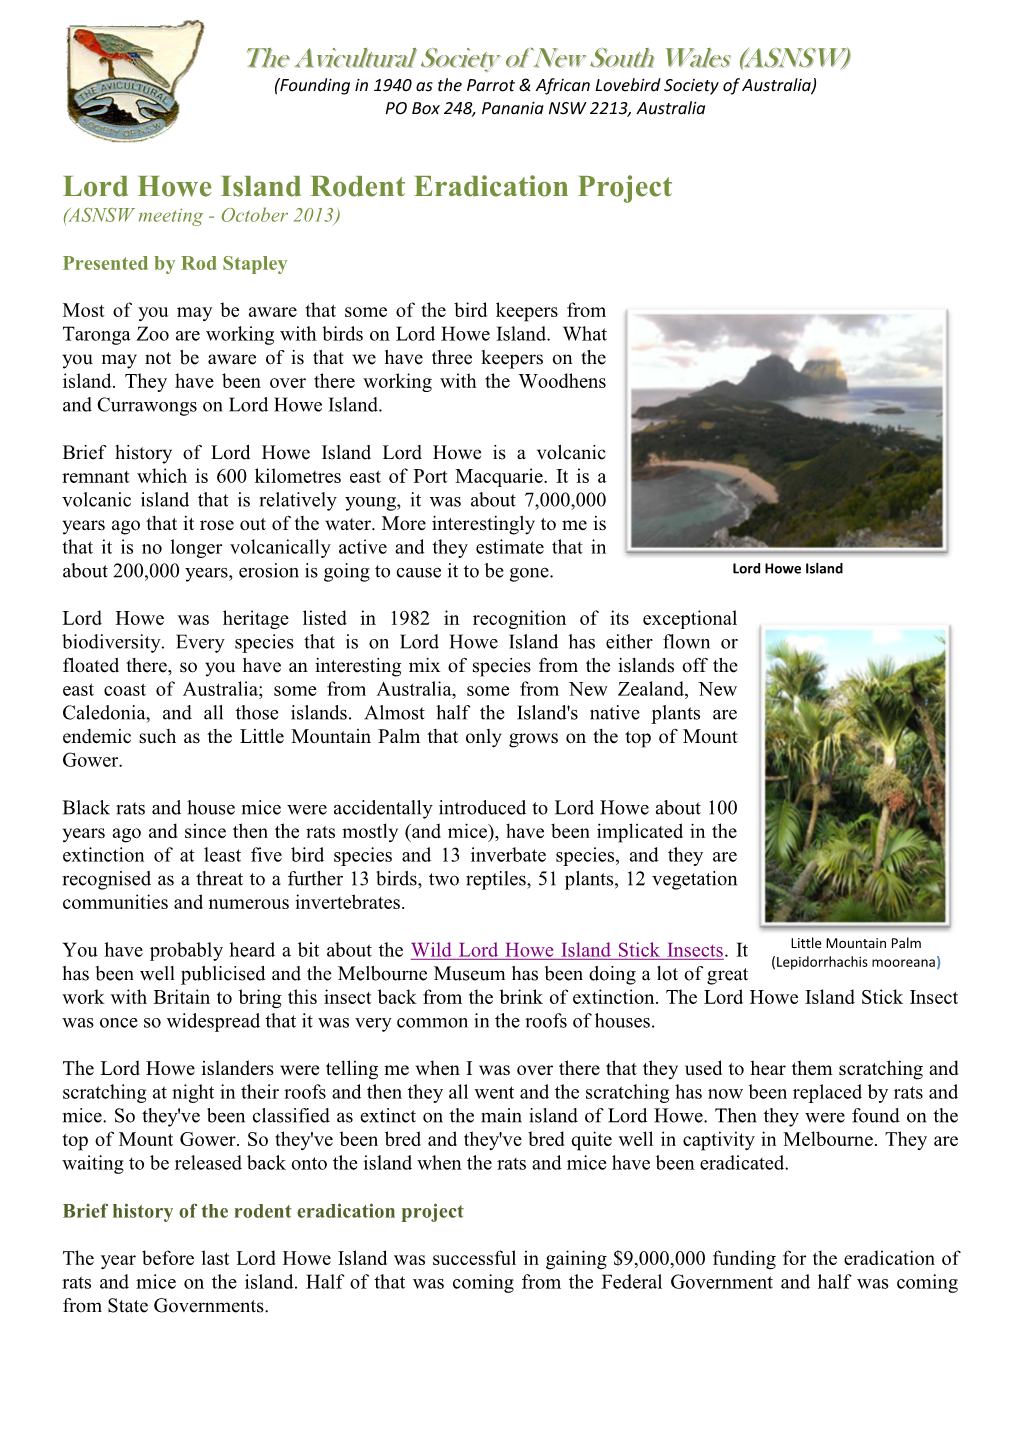 Lord Howe Island Rodent Eradication Project (ASNSW Meeting - October 2013)